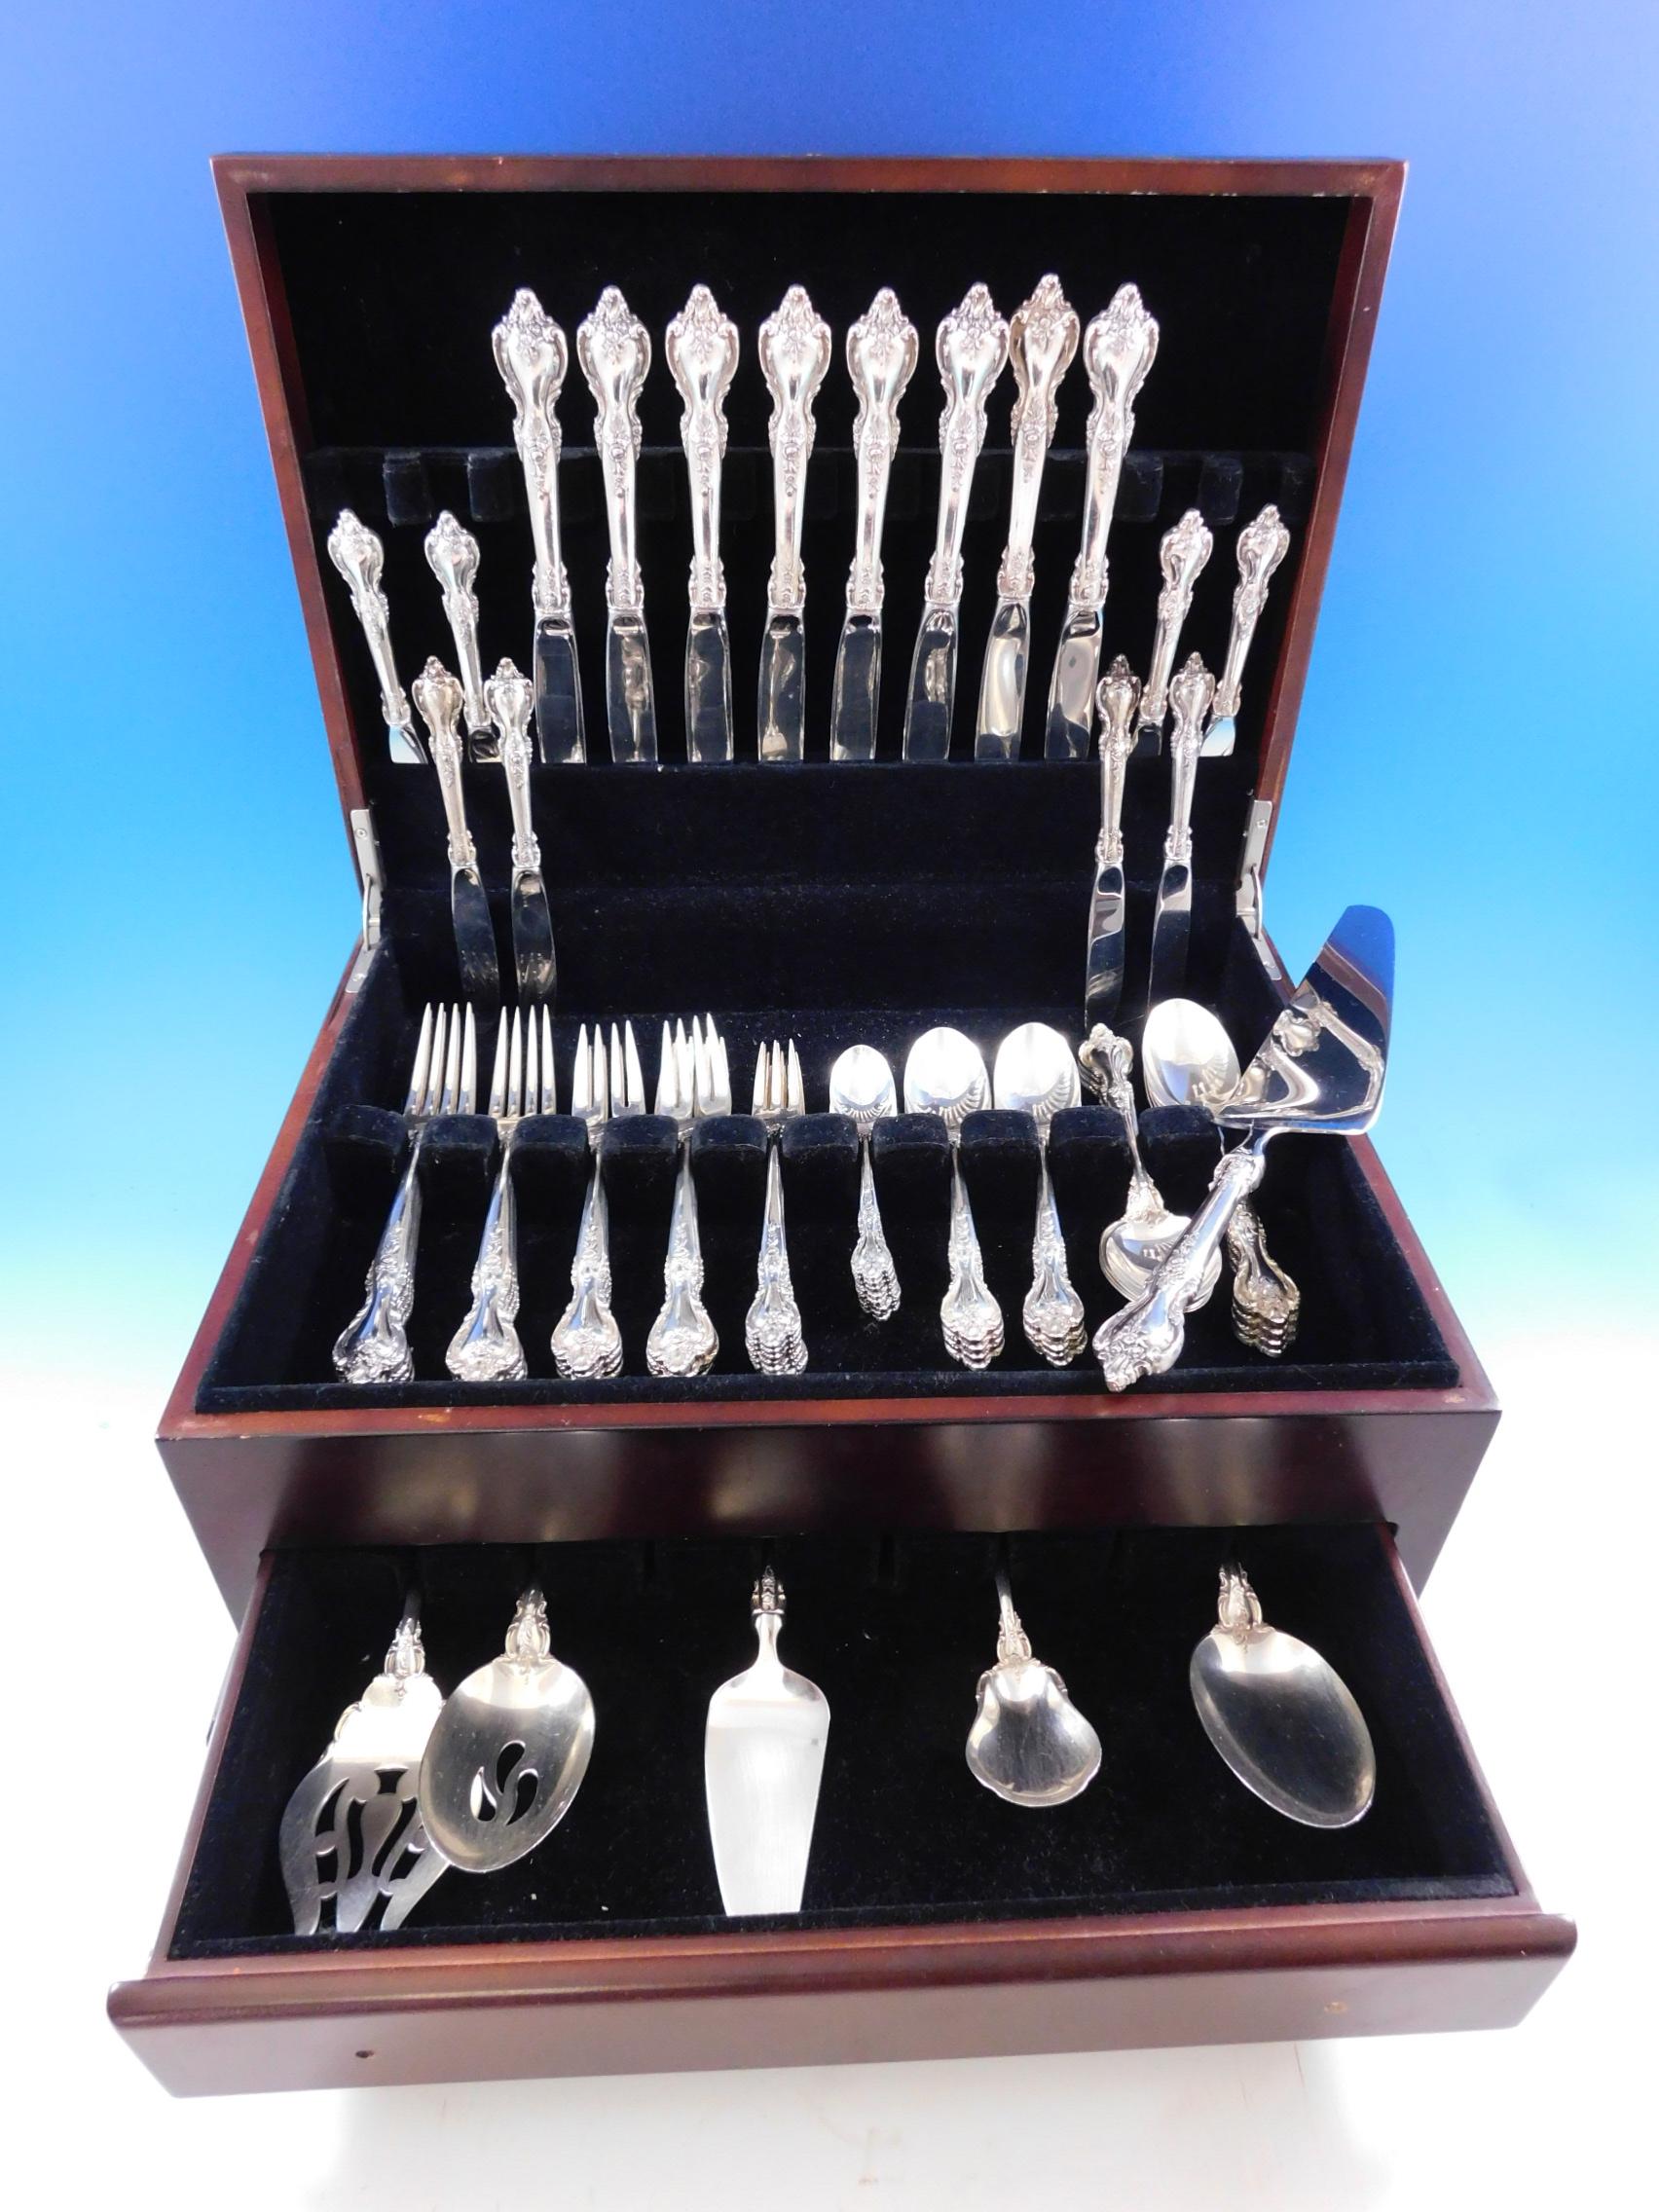 Gorgeous Delacourt by Lunt sterling silver Flatware set, 70 pieces. This set includes:

8 knives, 9 1/8